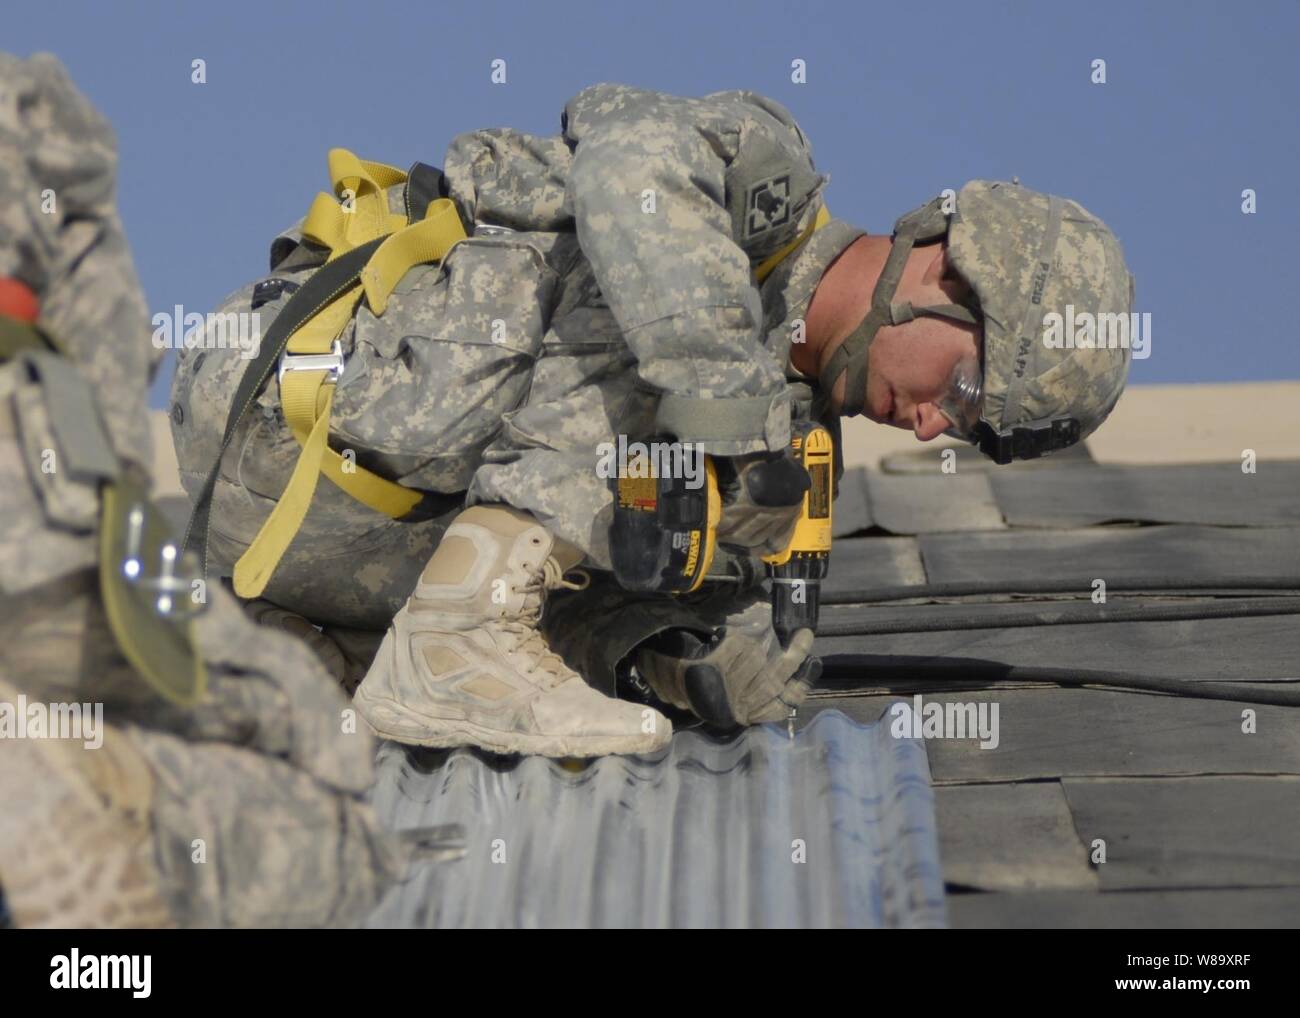 U.S. Army Pfc. Michael Papp, assigned to the 19th Engineer Battalion, installs tin sheets on a roof during a construction project at Kandahar Airfield, Afghanistan, on Sept. 14, 2009.  The 19th Engineer Battalion is forward-deployed to southern Afghanistan in support of Operation Enduring Freedom. Stock Photo